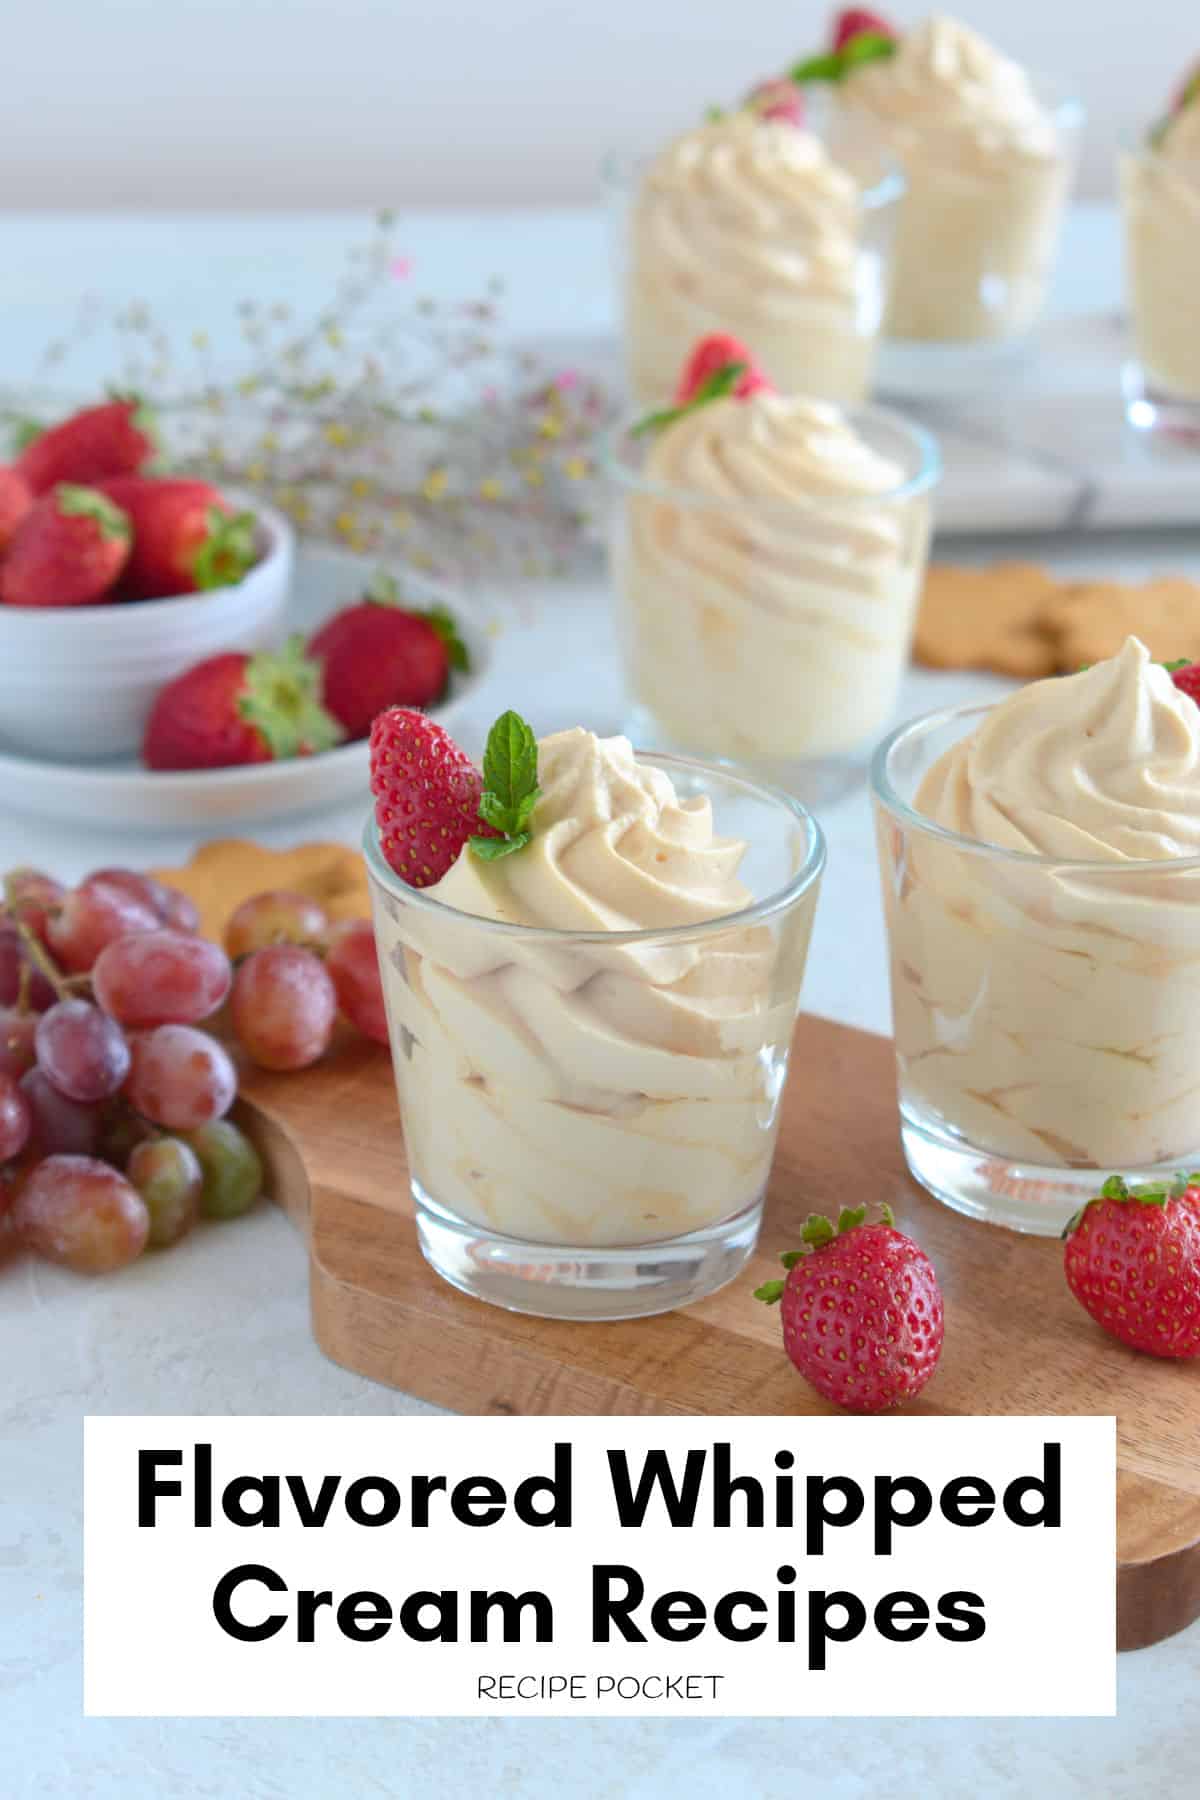 Small dessert glassed filled with flavored whipped cream.